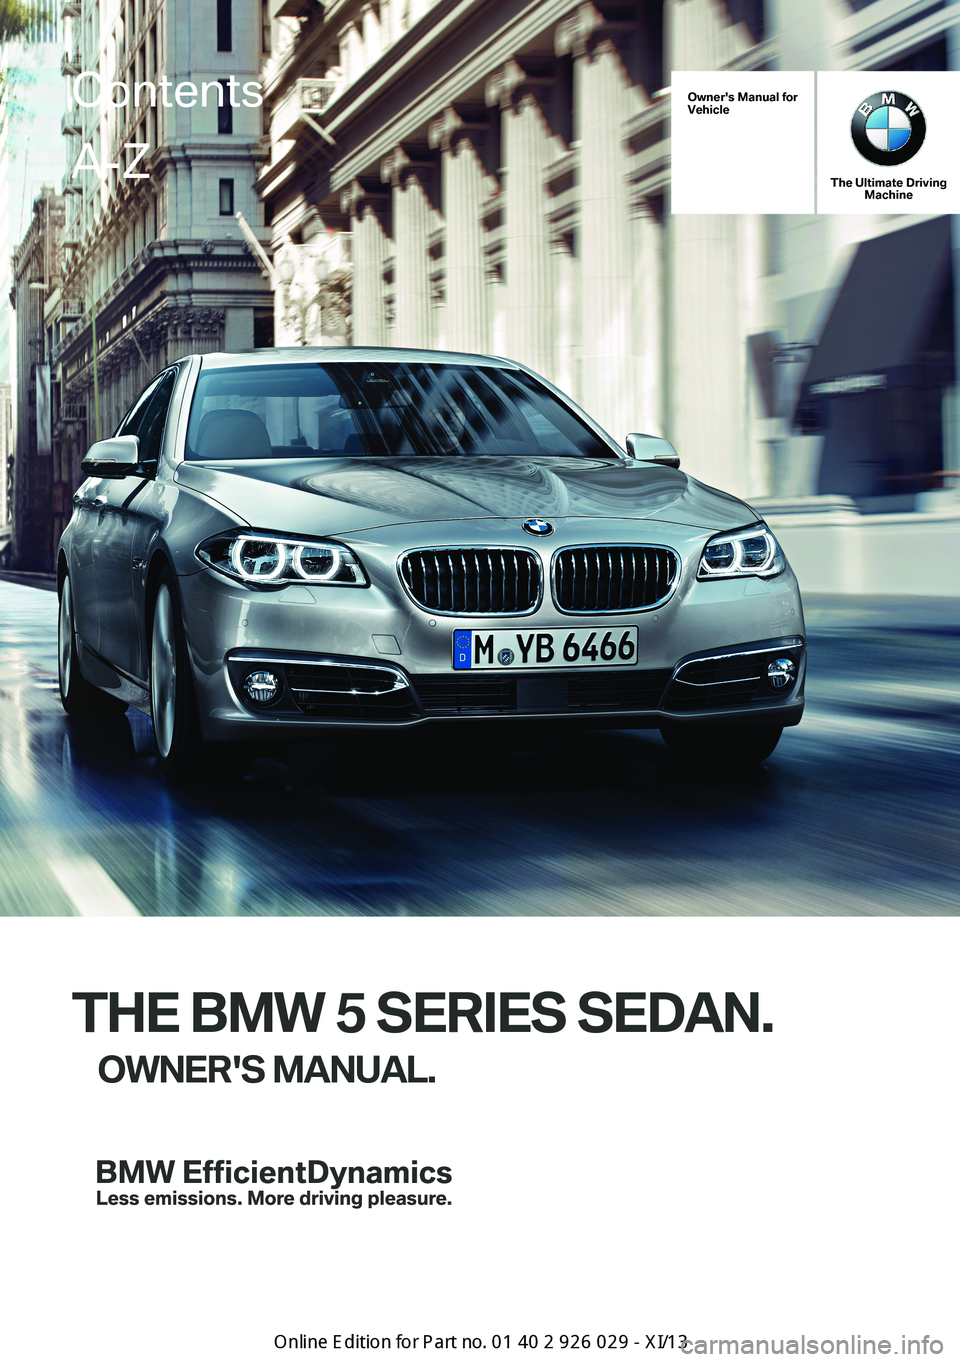 BMW 5 SERIES 2013 F10 Owners Manual Owner's Manual forVehicle
The Ultimate DrivingMachine
THE BMW 5 SERIES SEDAN.
OWNER'S MANUAL.ContentsA-Z
Online Edition for Part no. 01 40 2 911 177 - VI/13   